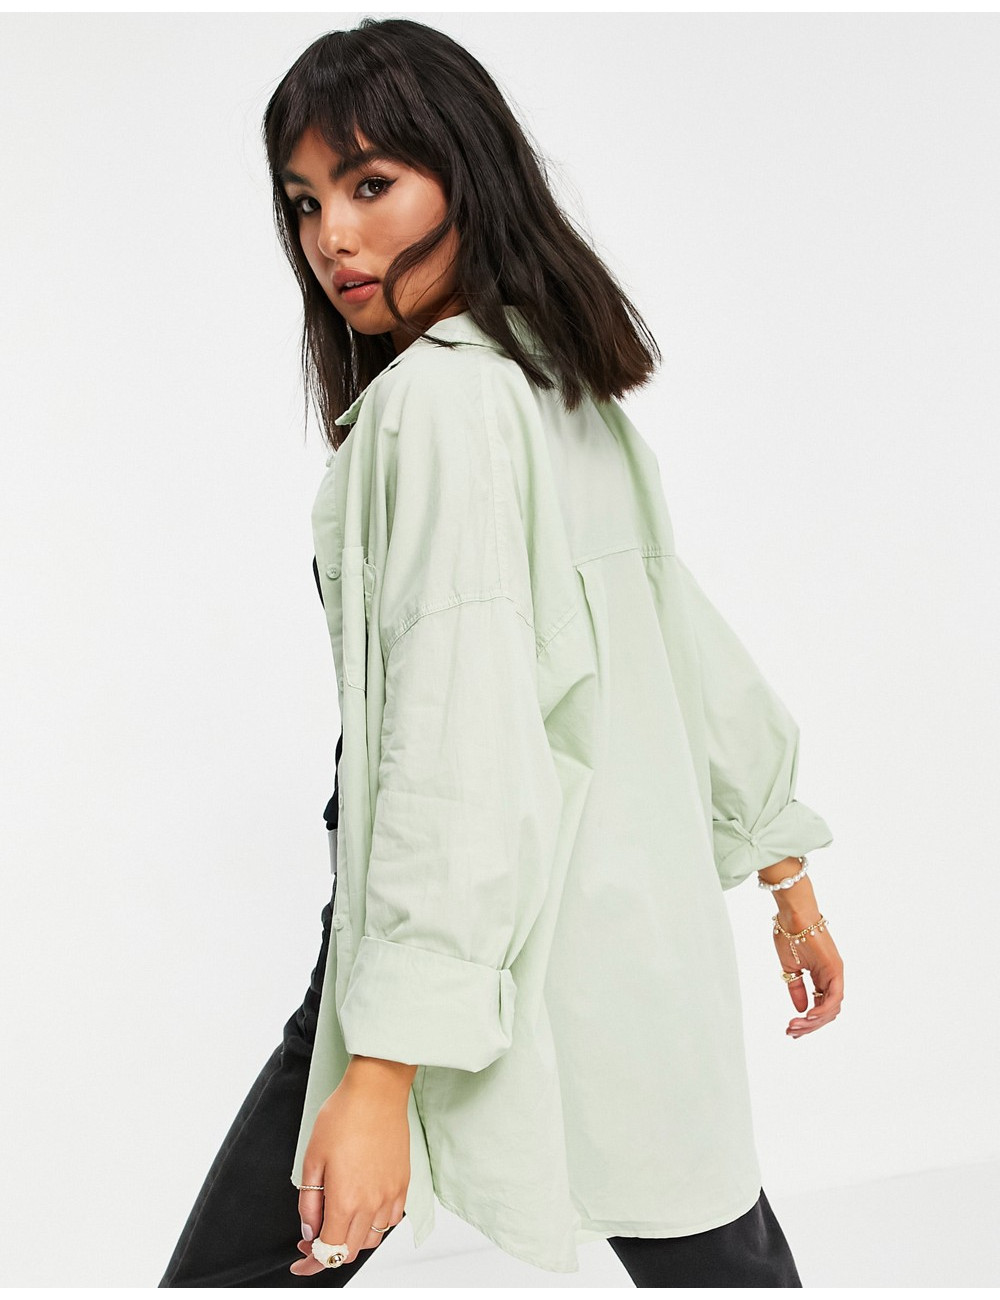 Cotton:On dad shirt in mint